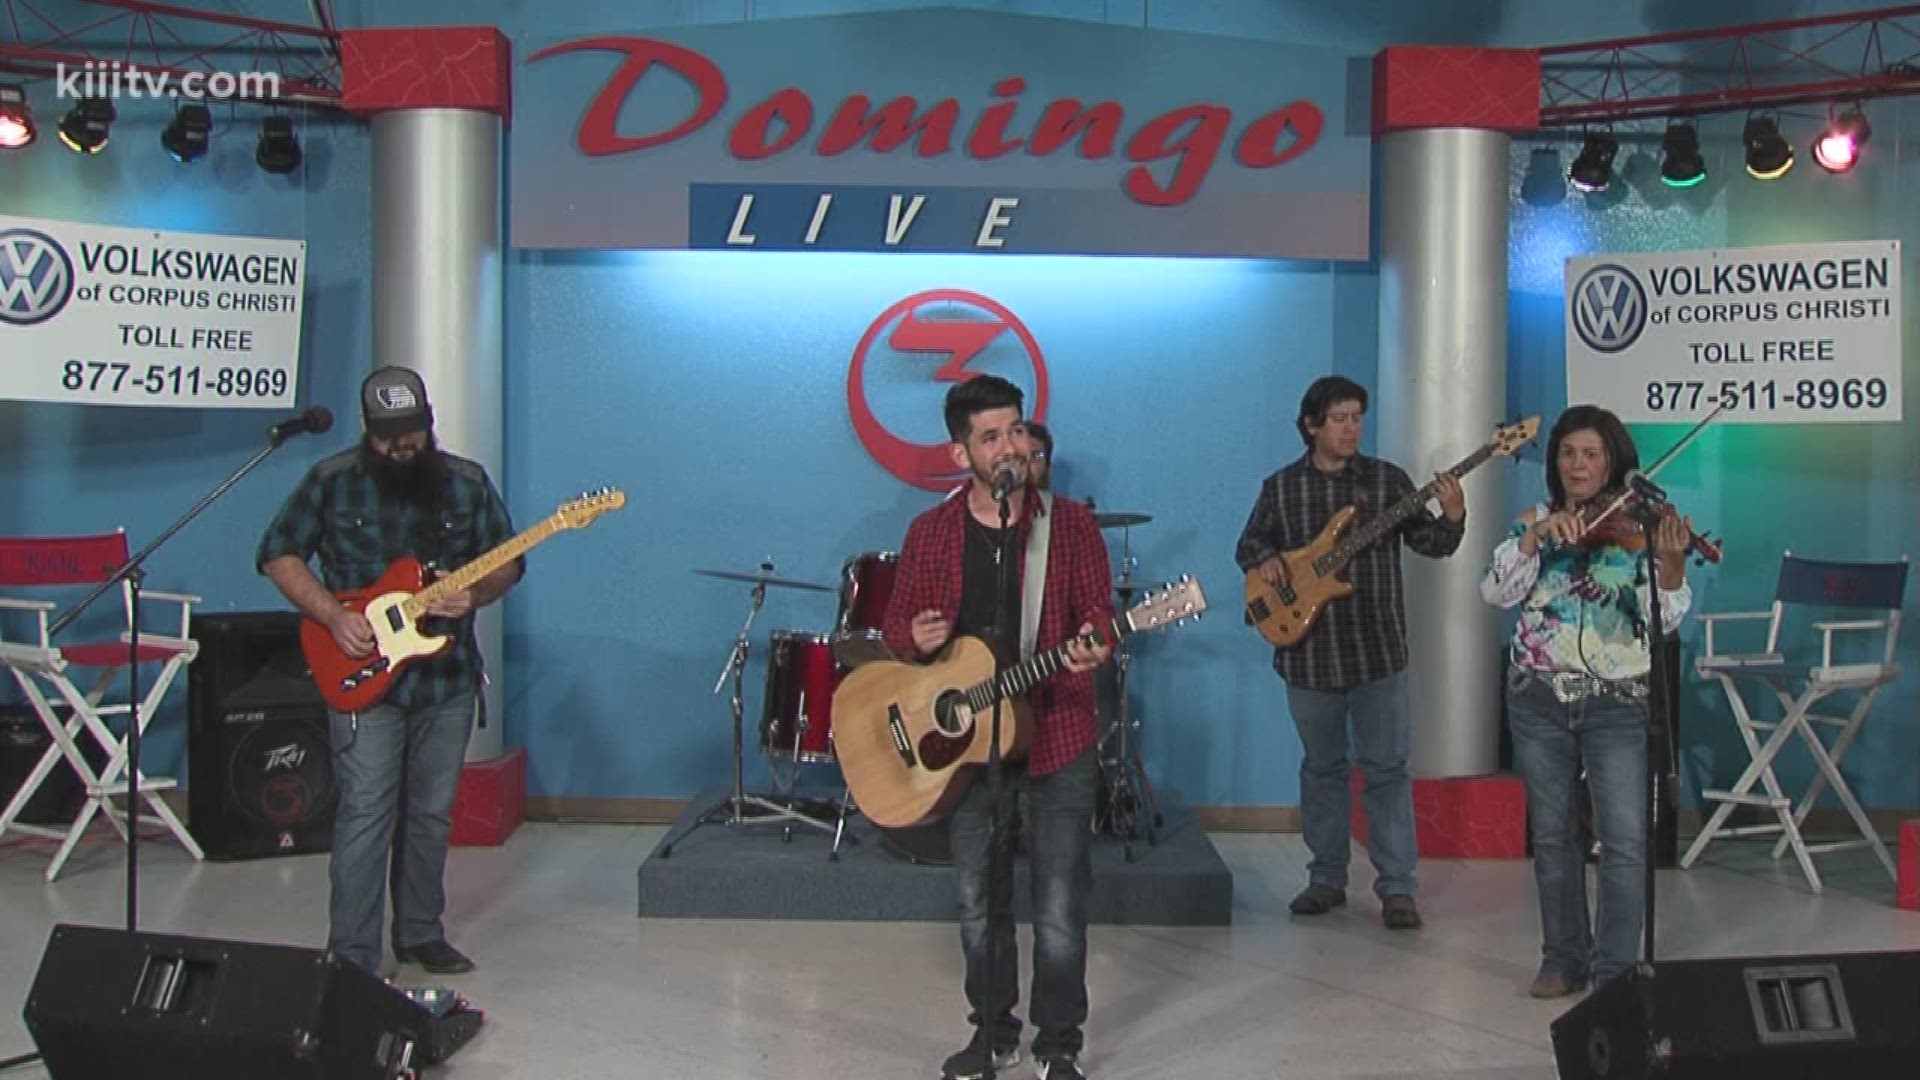 Southern Ashes Performing "Your Kiss" on Domingo Live!